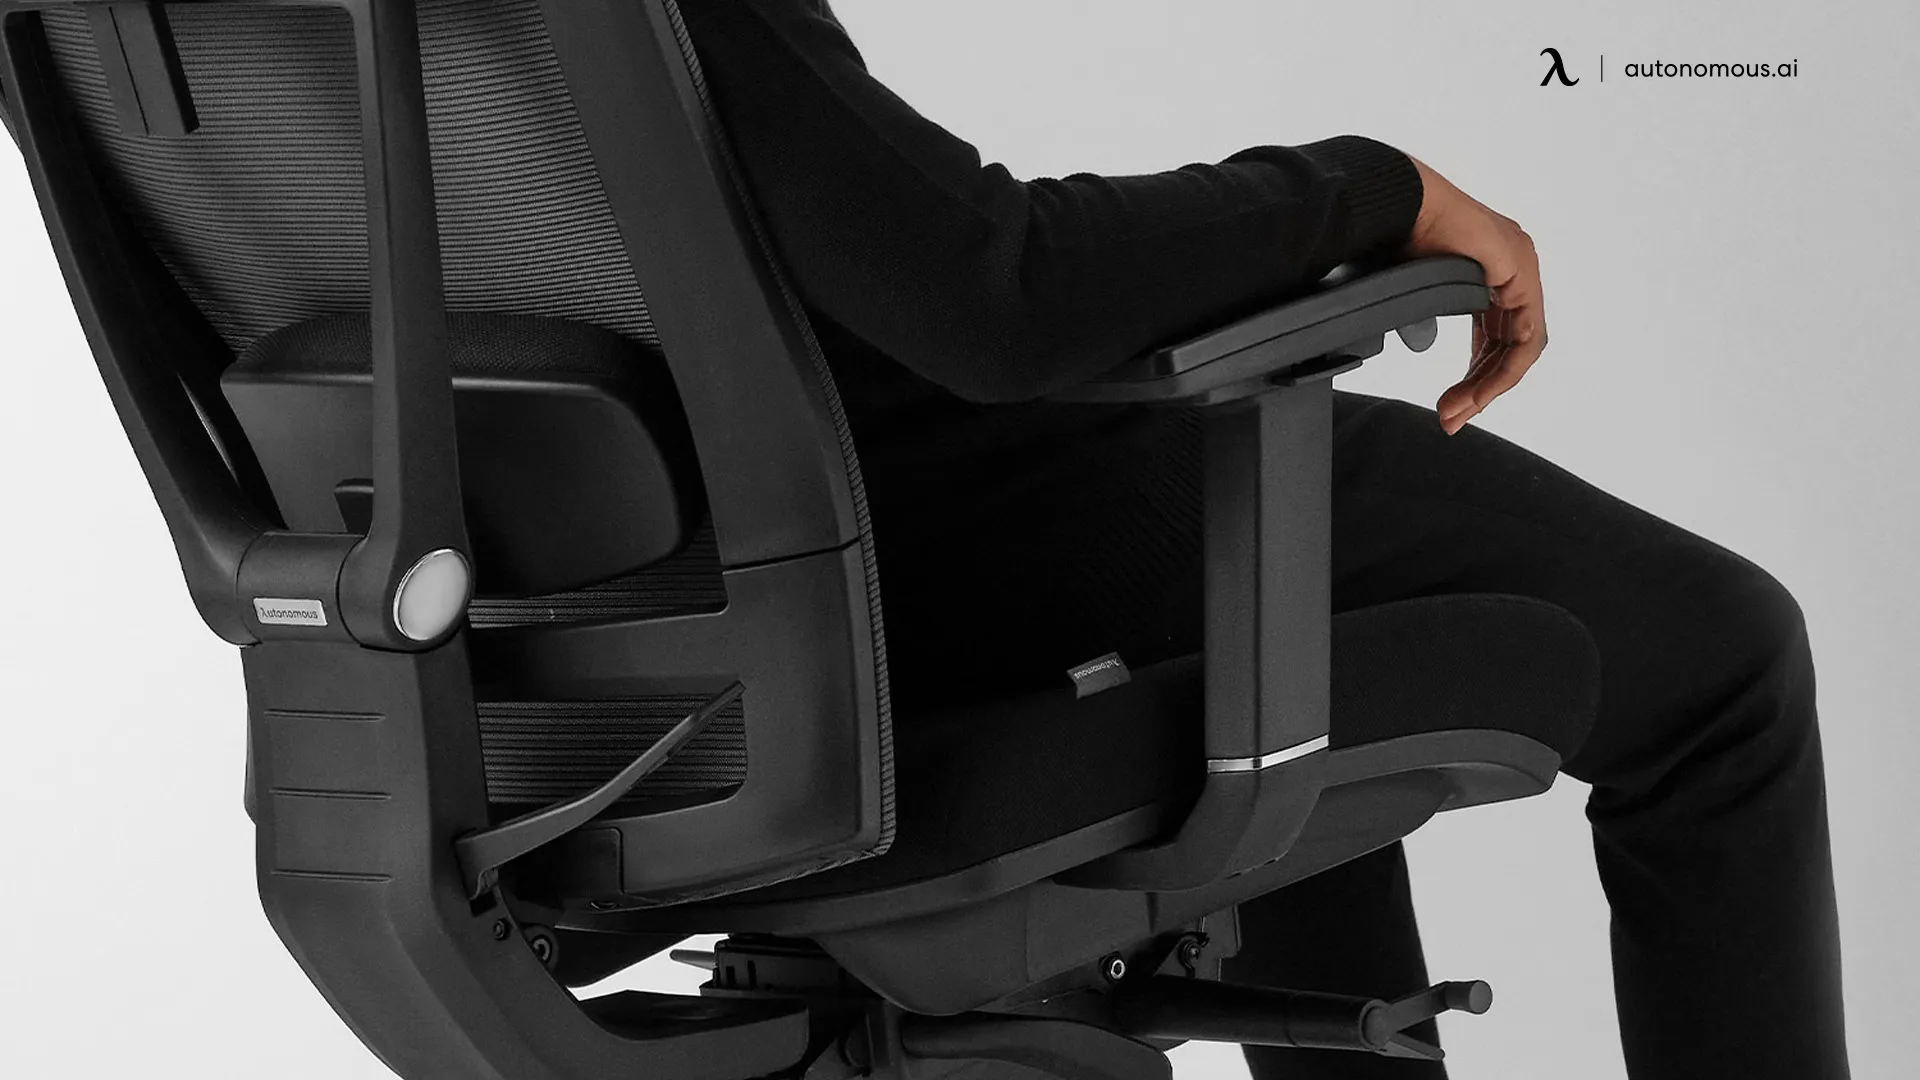 How to Choose the Best Chair for Back Pain